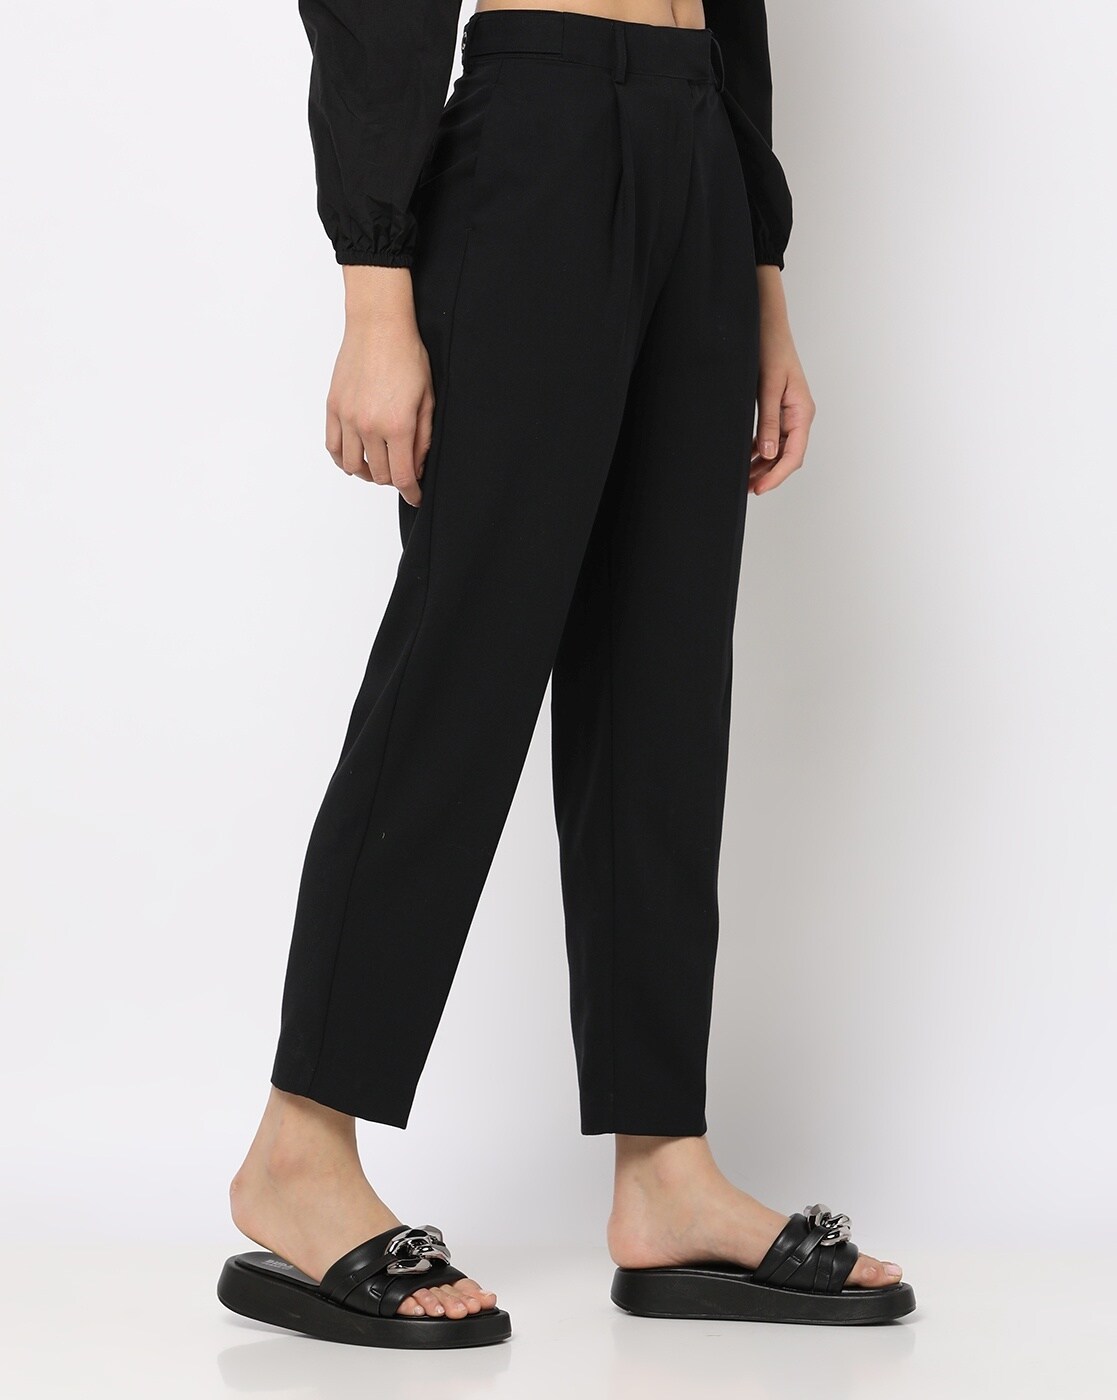 MAGRE Bottoms Pants and Trousers  Buy Magre Black Belted Peg Pants Online   Nykaa Fashion